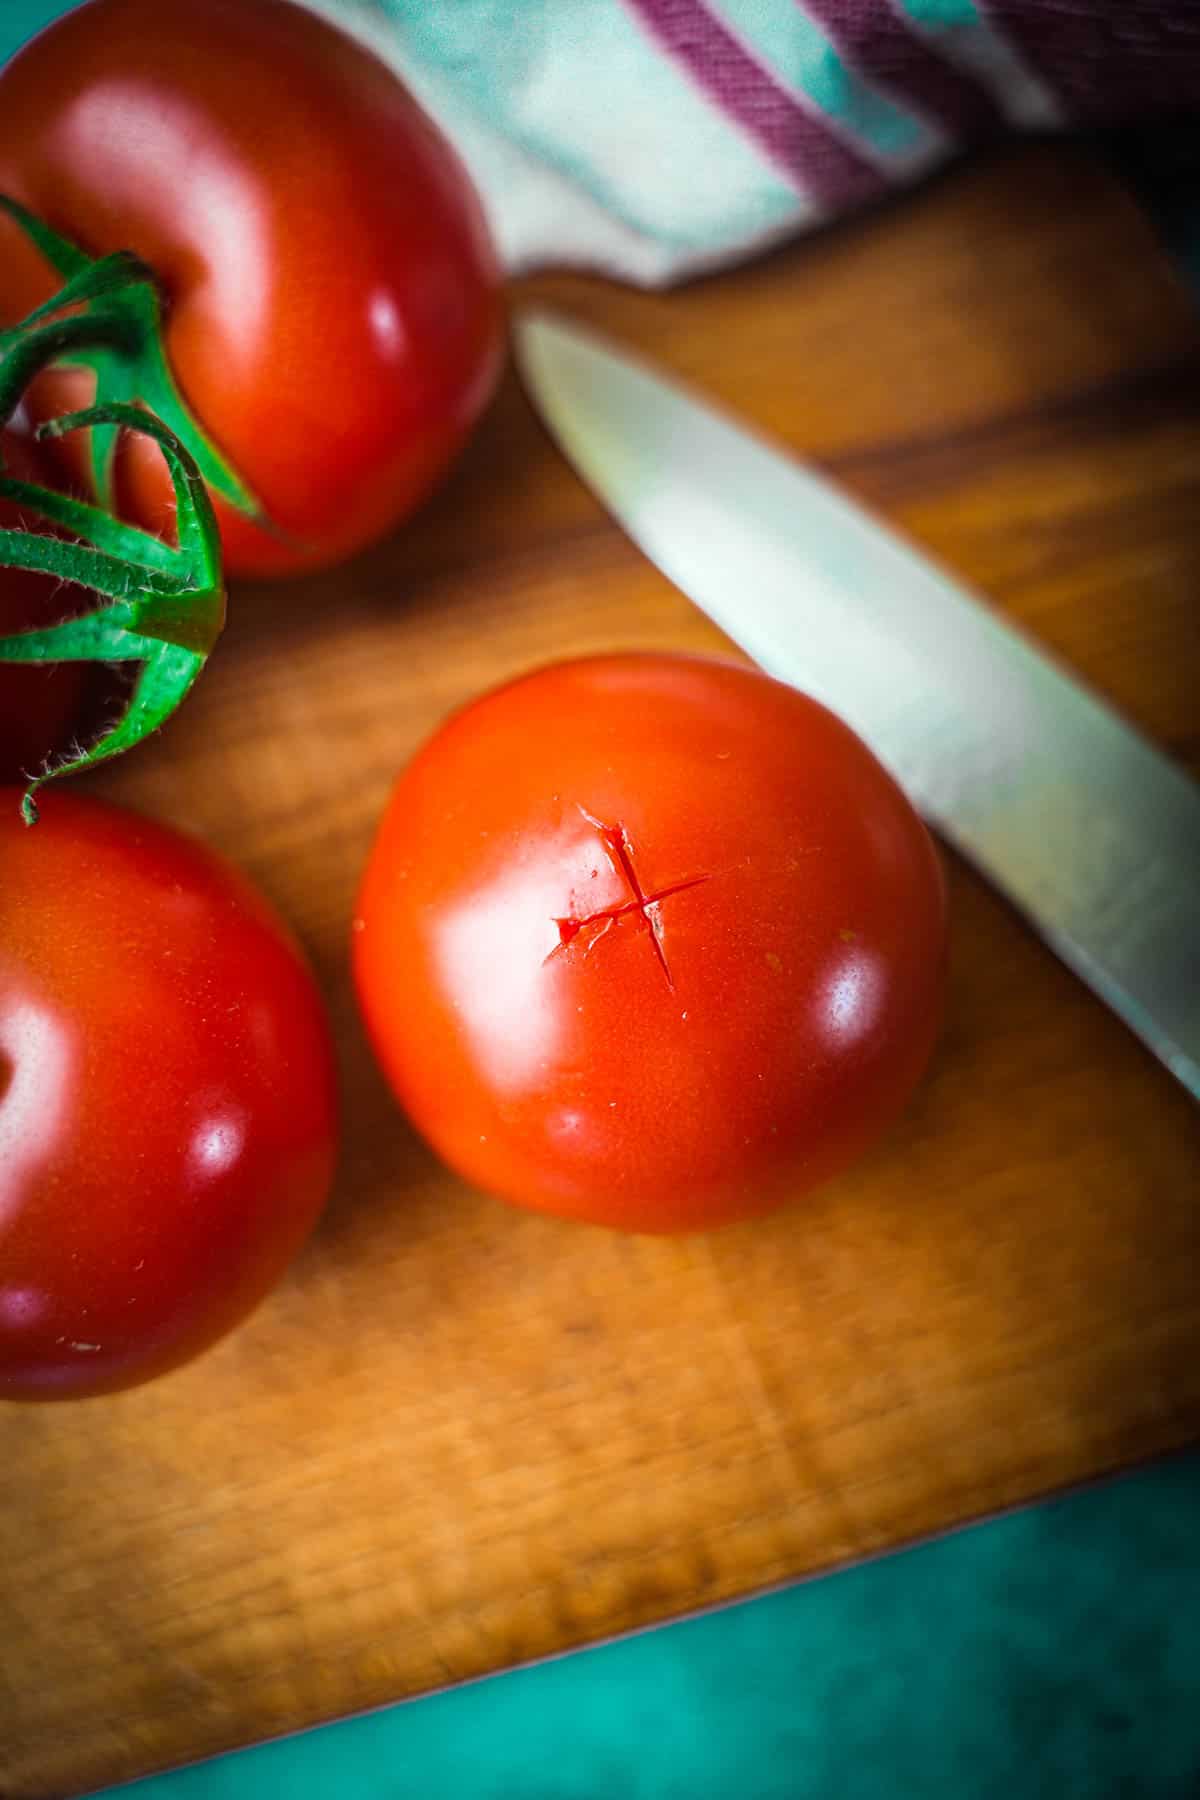 An X is cut into the bottom of a tomato before blanching. A knife and more tomatoes are in the background.